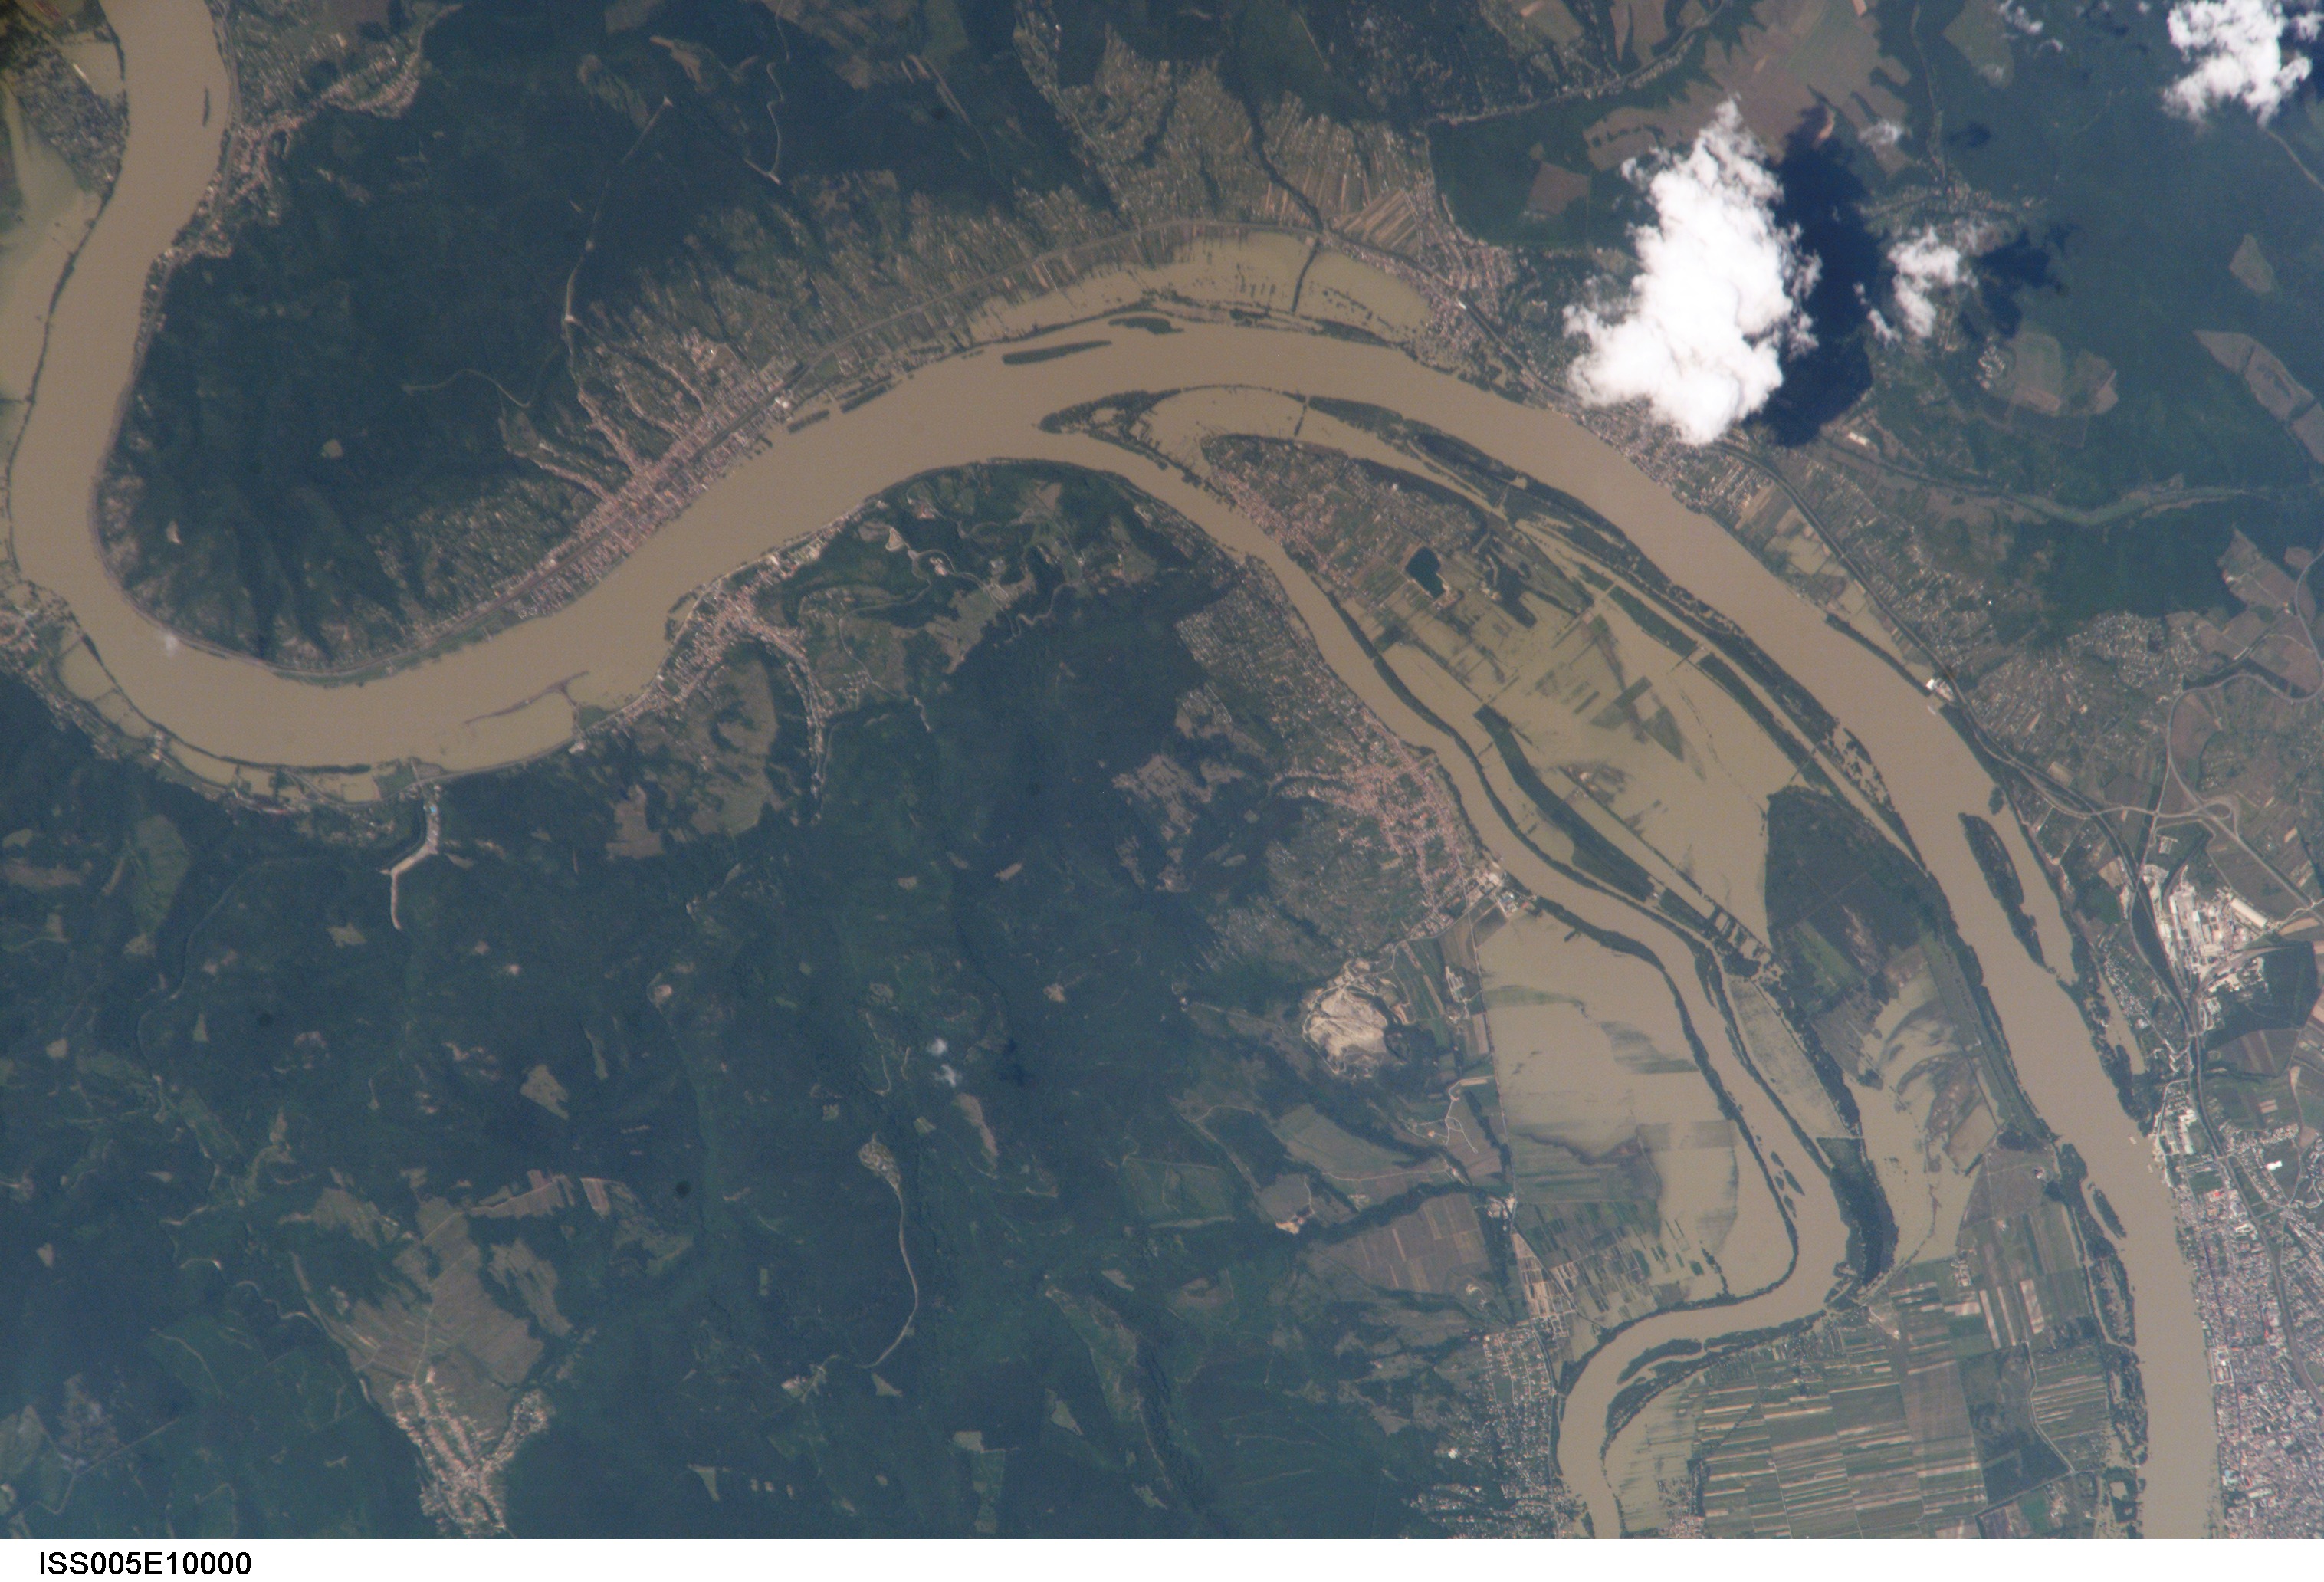 Danube River flooding near Vac, Hungary - related image preview